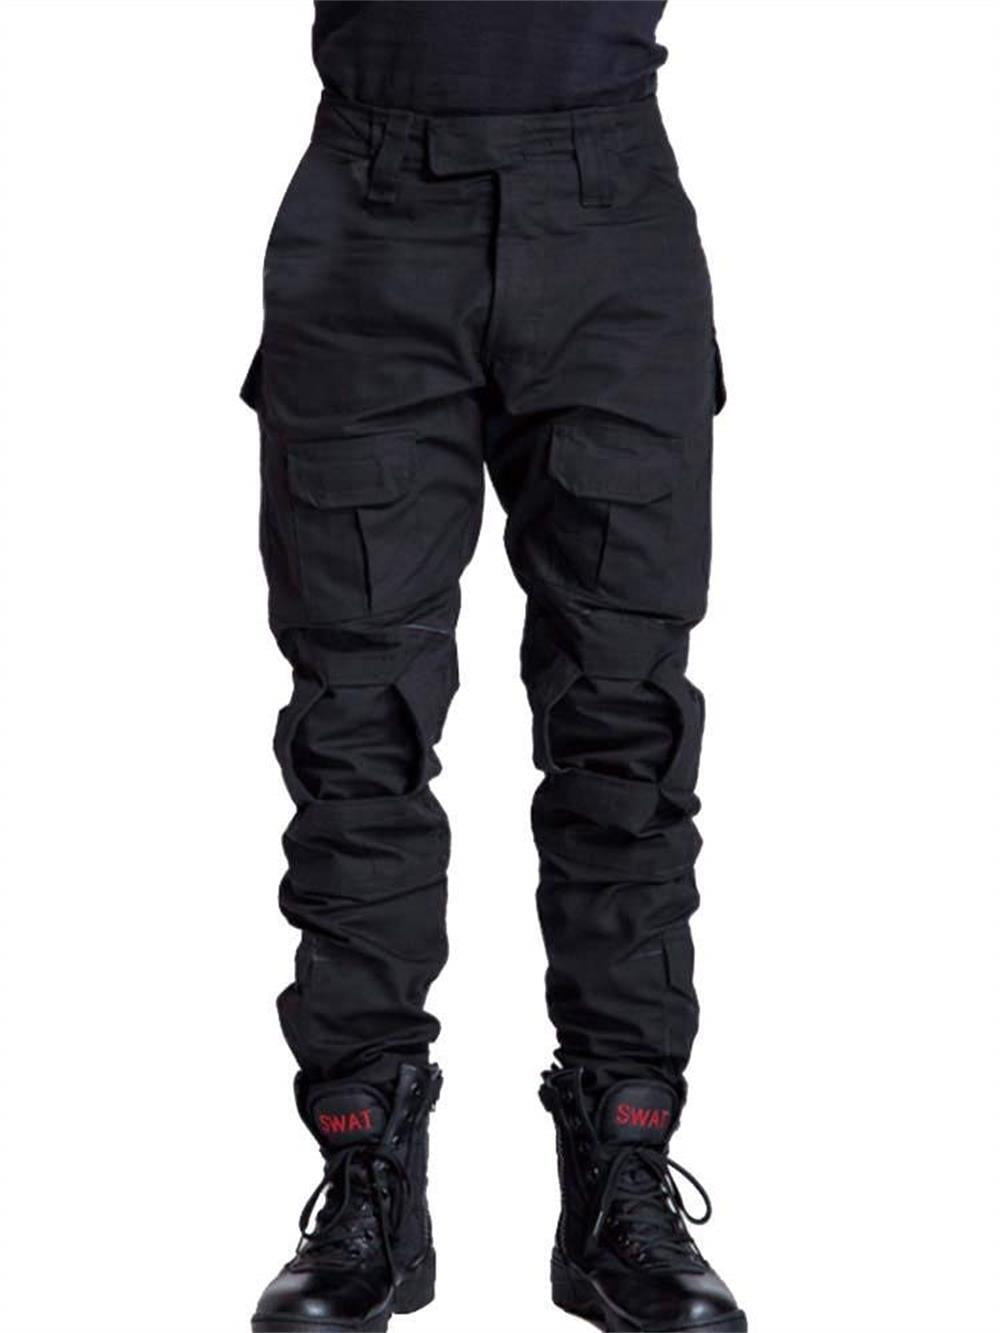 TRGPSG Men's Outdoor Hiking Pants with 10 Pockets Cargo Work Pants ...